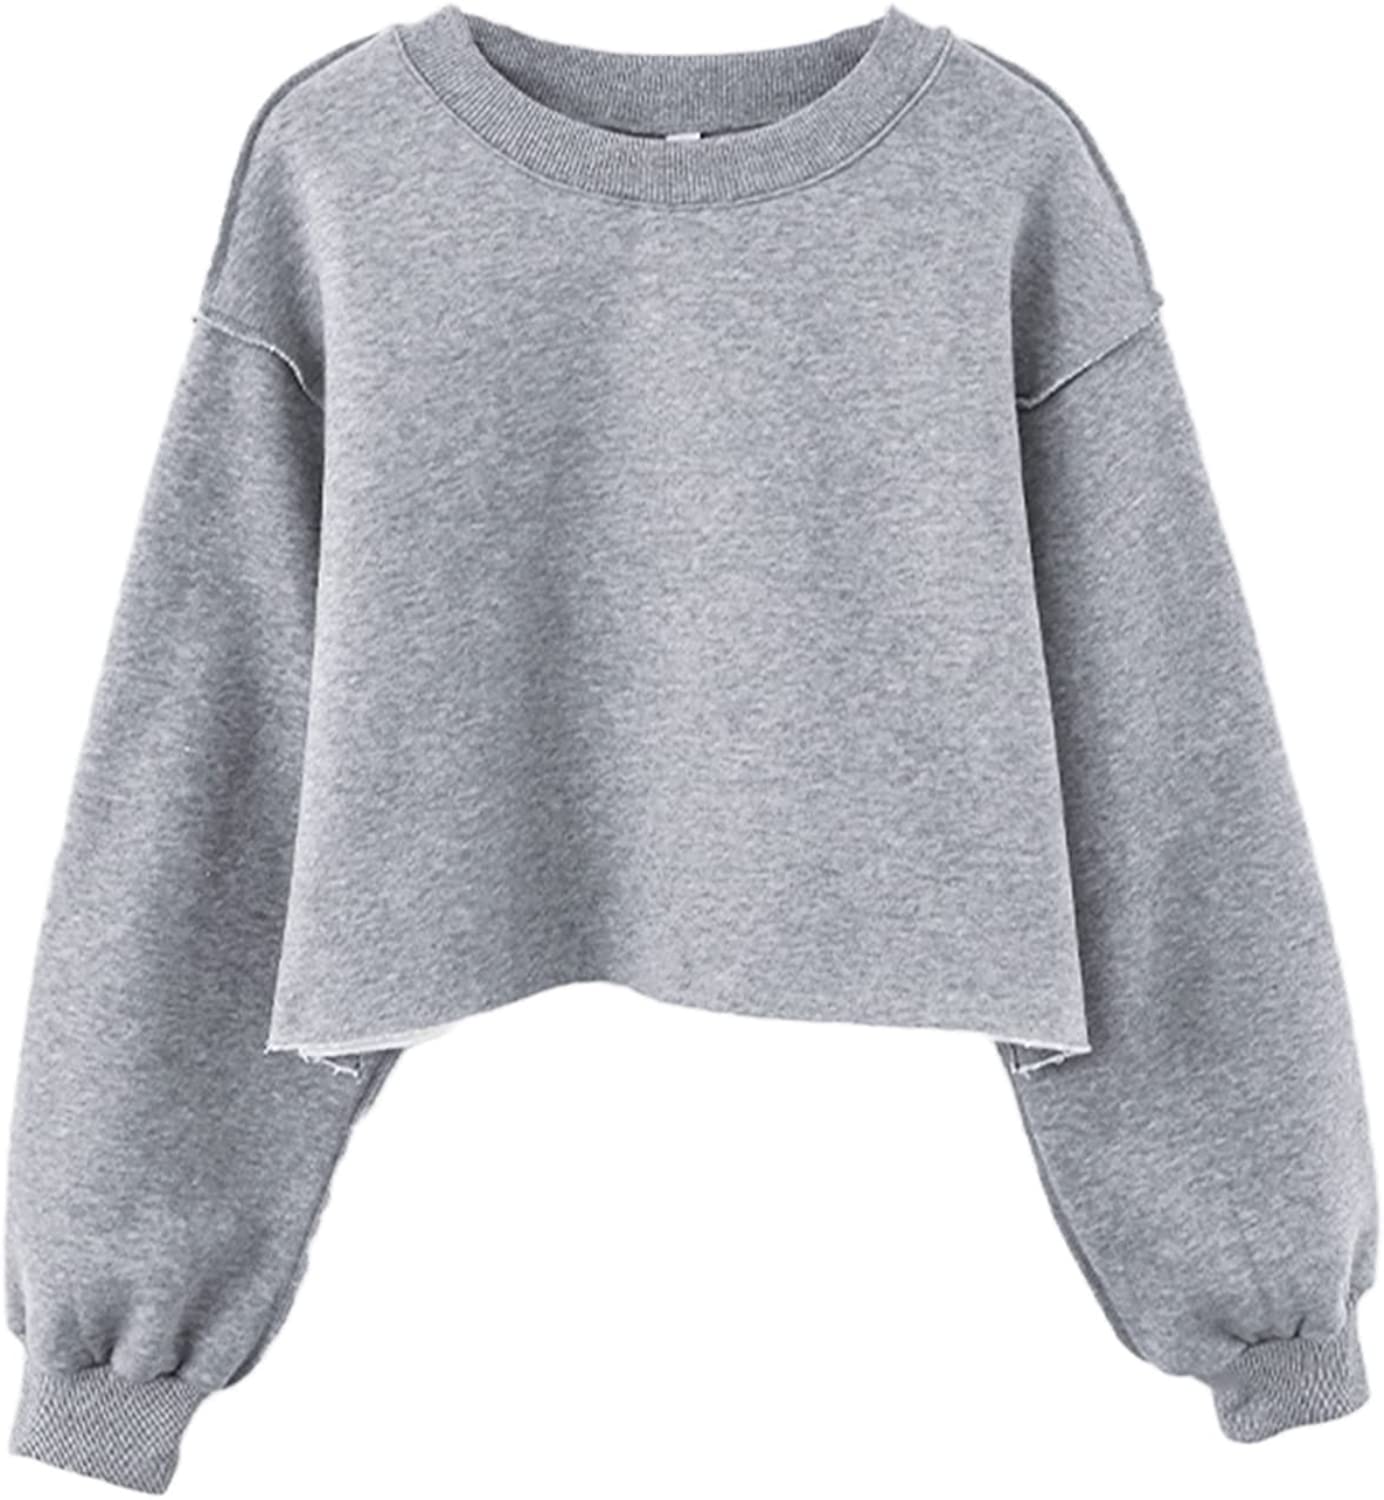 Plain Grey Cropped Female Clothes Pullovers Sweatshirts for Women Tops  Cheap and Free Shipping Long Sleeve Thick Emo Warm M Xxl